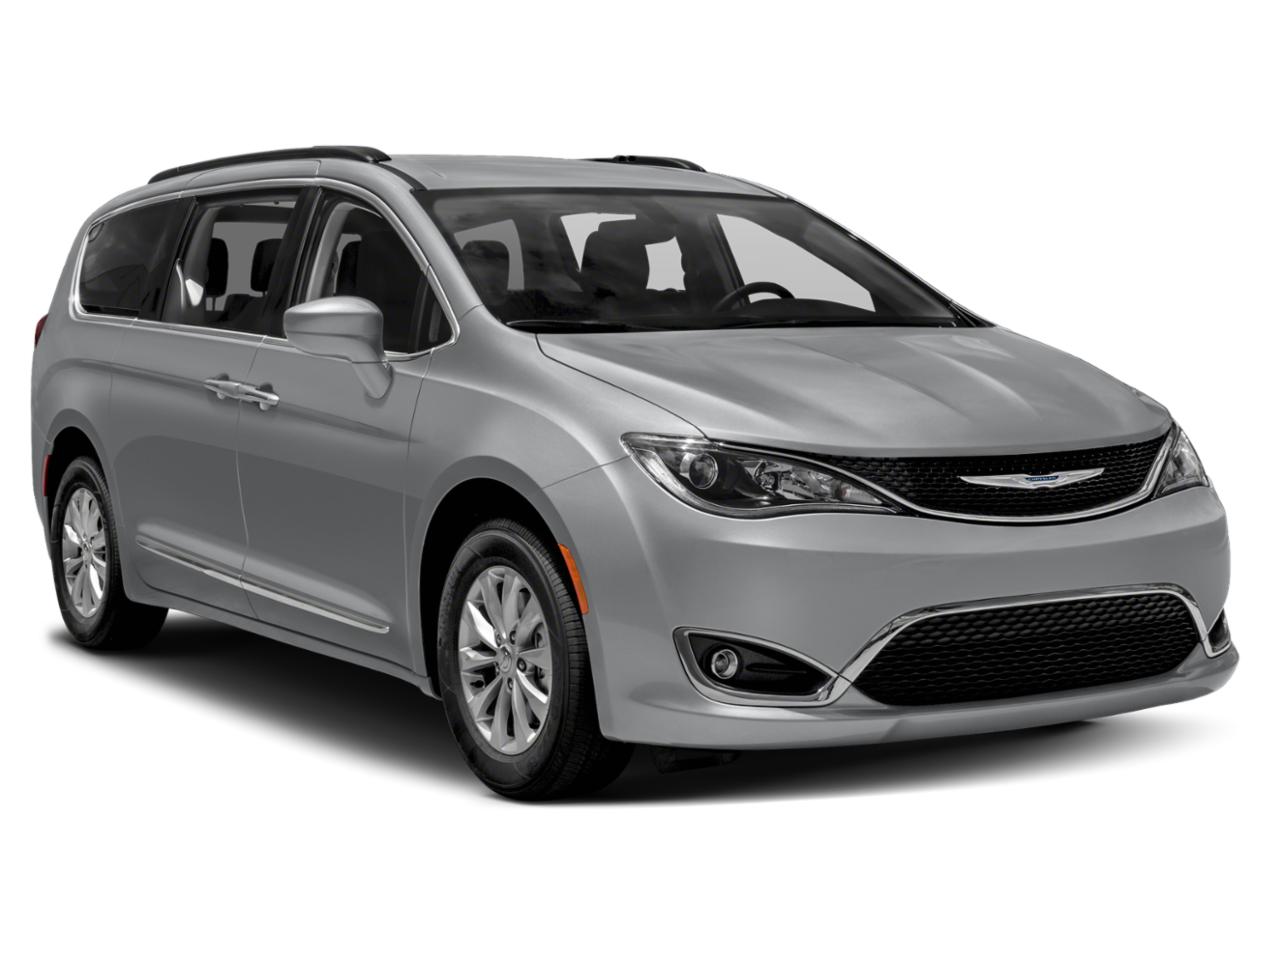 2019 Chrysler Pacifica Vehicle Photo in Pembroke Pines, FL 33027